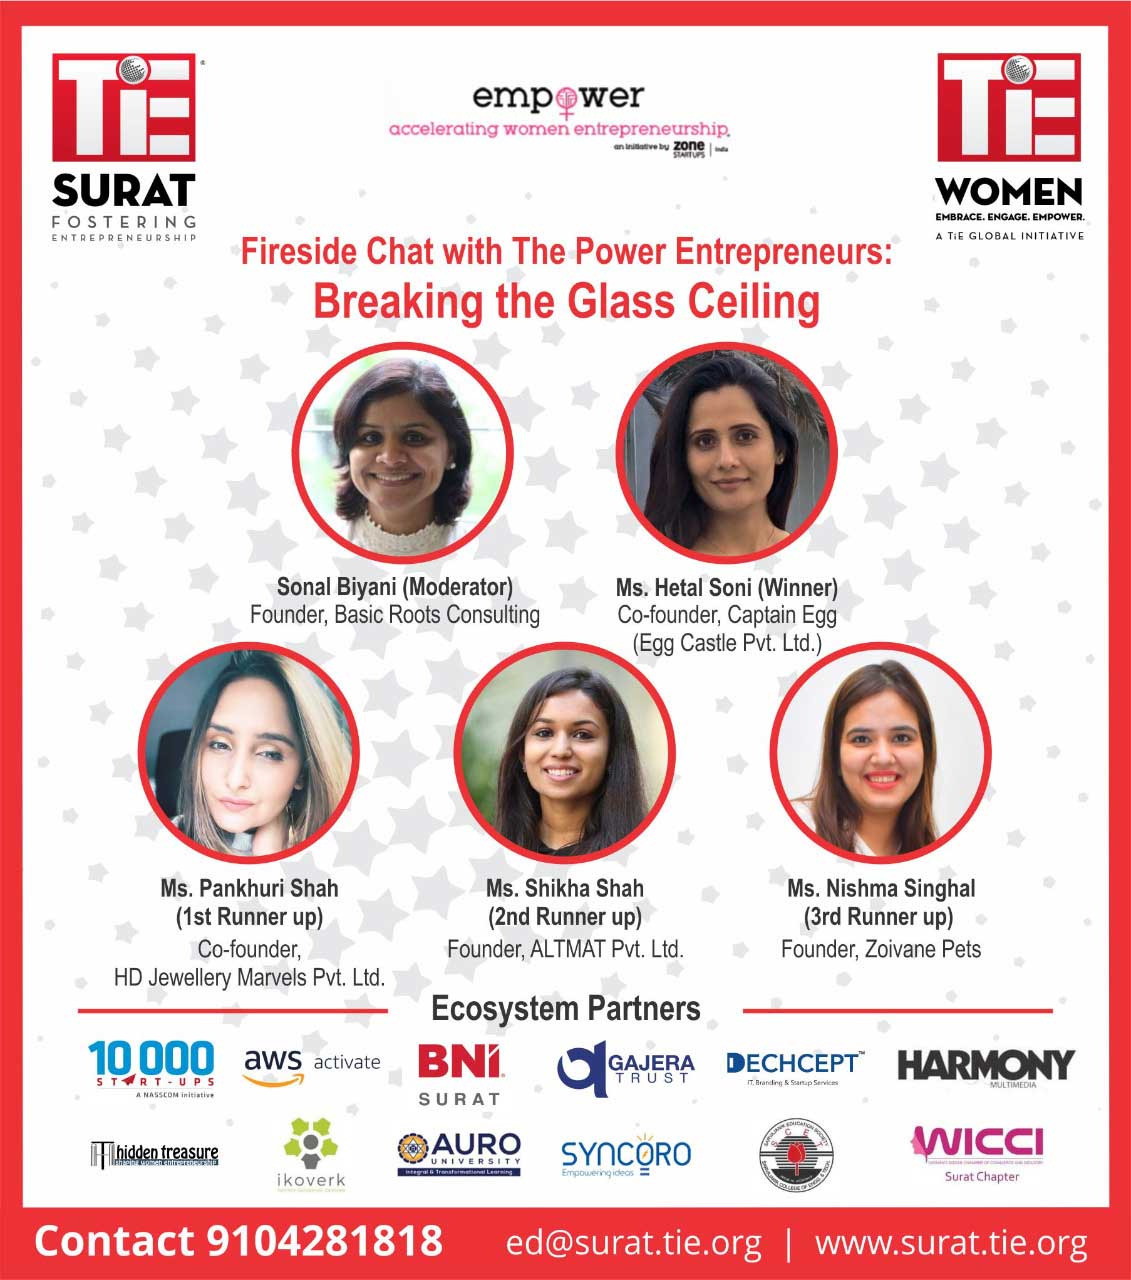 Fireside-Chat-with-The-Power-Entrepreneurs-Breaking-the-Glass-Ceiling